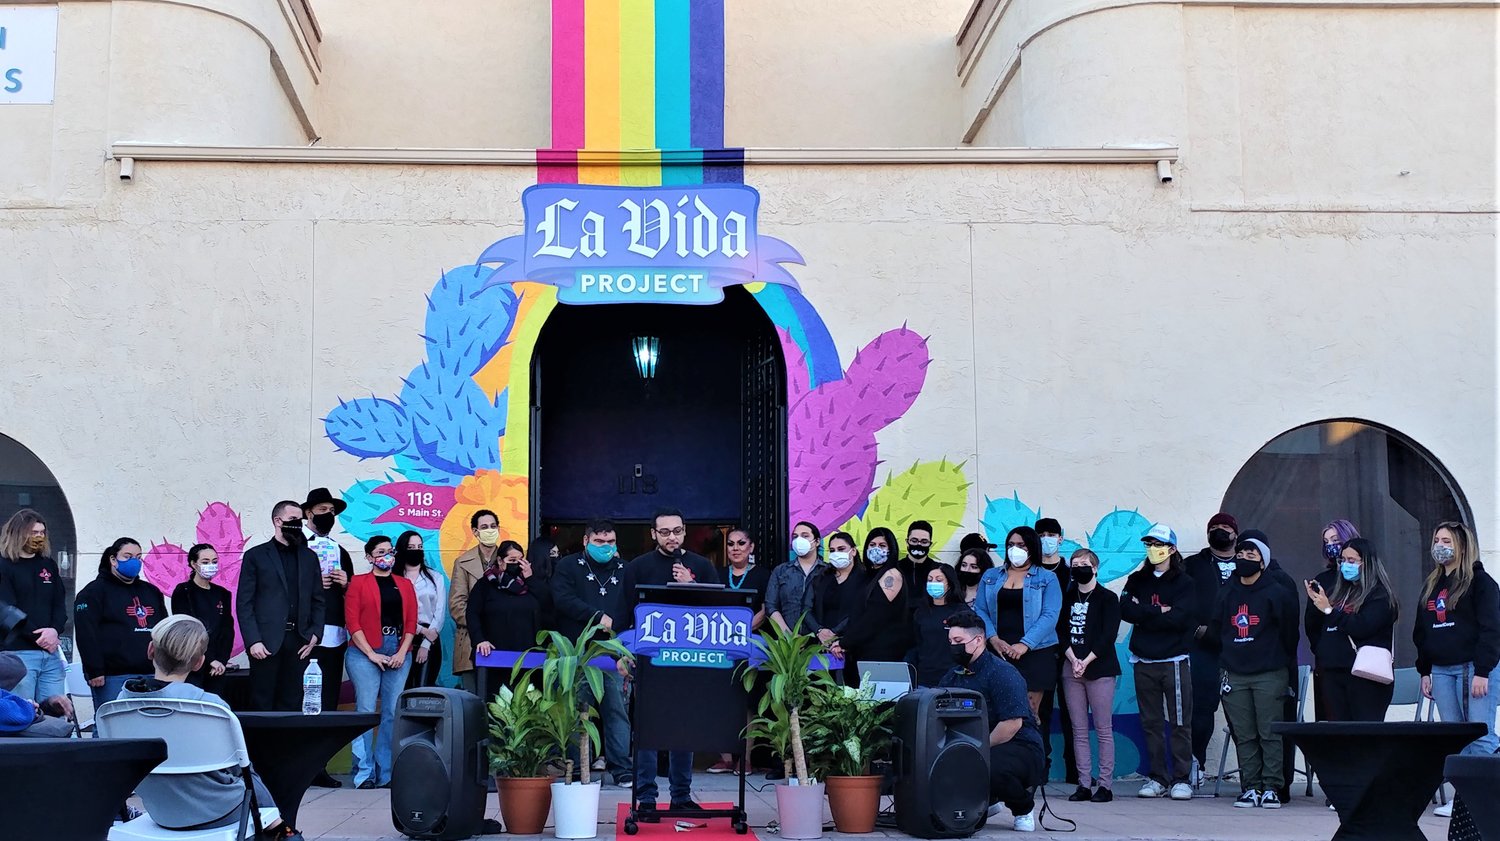 Staff and volunteers of FYI+ La Vida Project Innovative Youth Programs and Resource Center at the center’s grand opening Friday evening, Jan. 7, at 118 S. Main St. Downtown. La Vida Project team member and FYI+ Assistant AmeriCorps Supervisor Dez Serna is at the lectern.